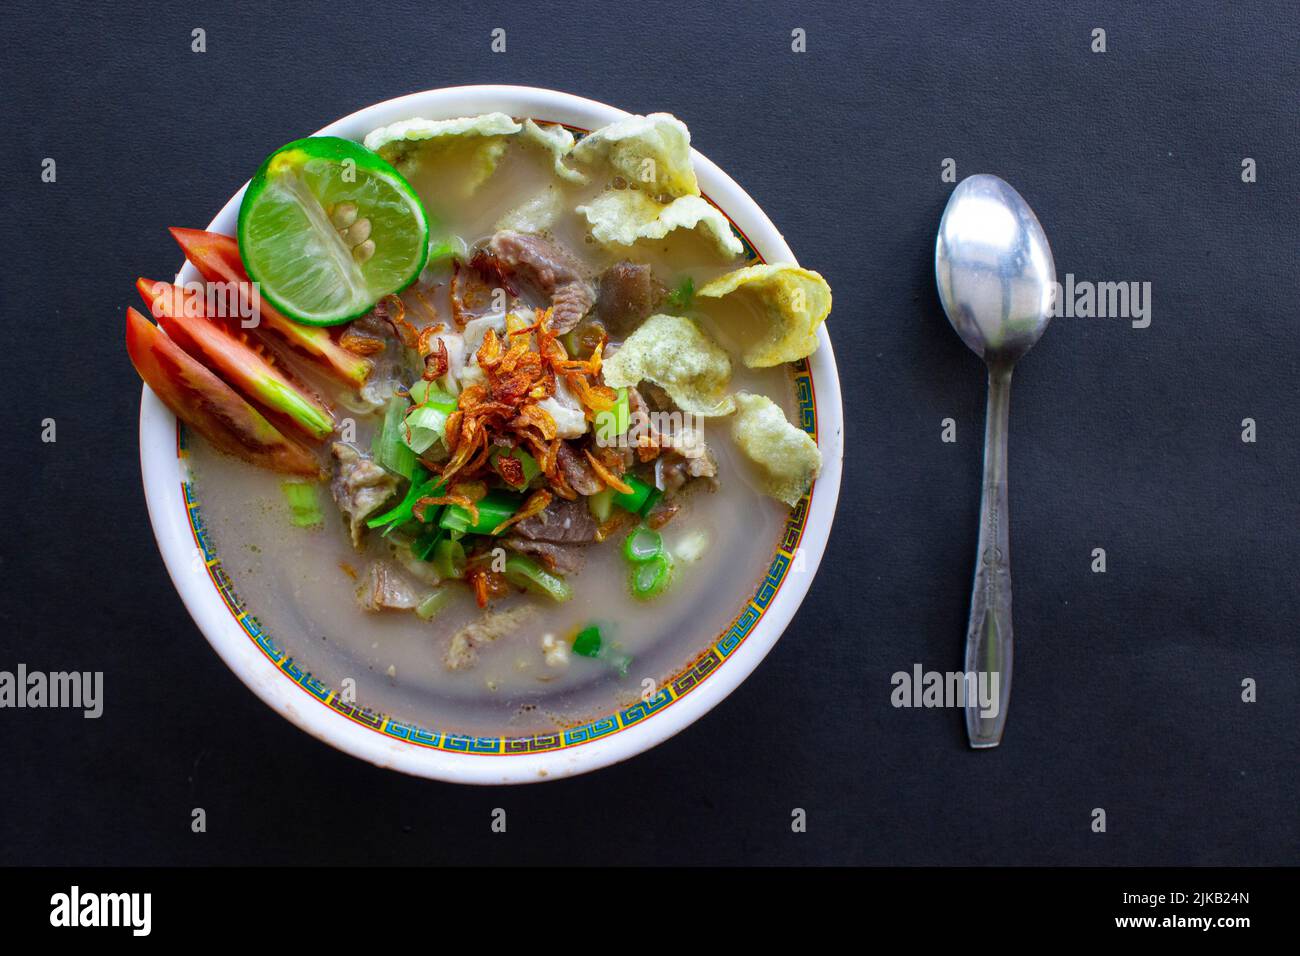 sop kaki kambing a traditional food from Betawi, Jakarta Indonesia, made from mutton or lamb, offal, spices. isolated on black background.This food Stock Photo